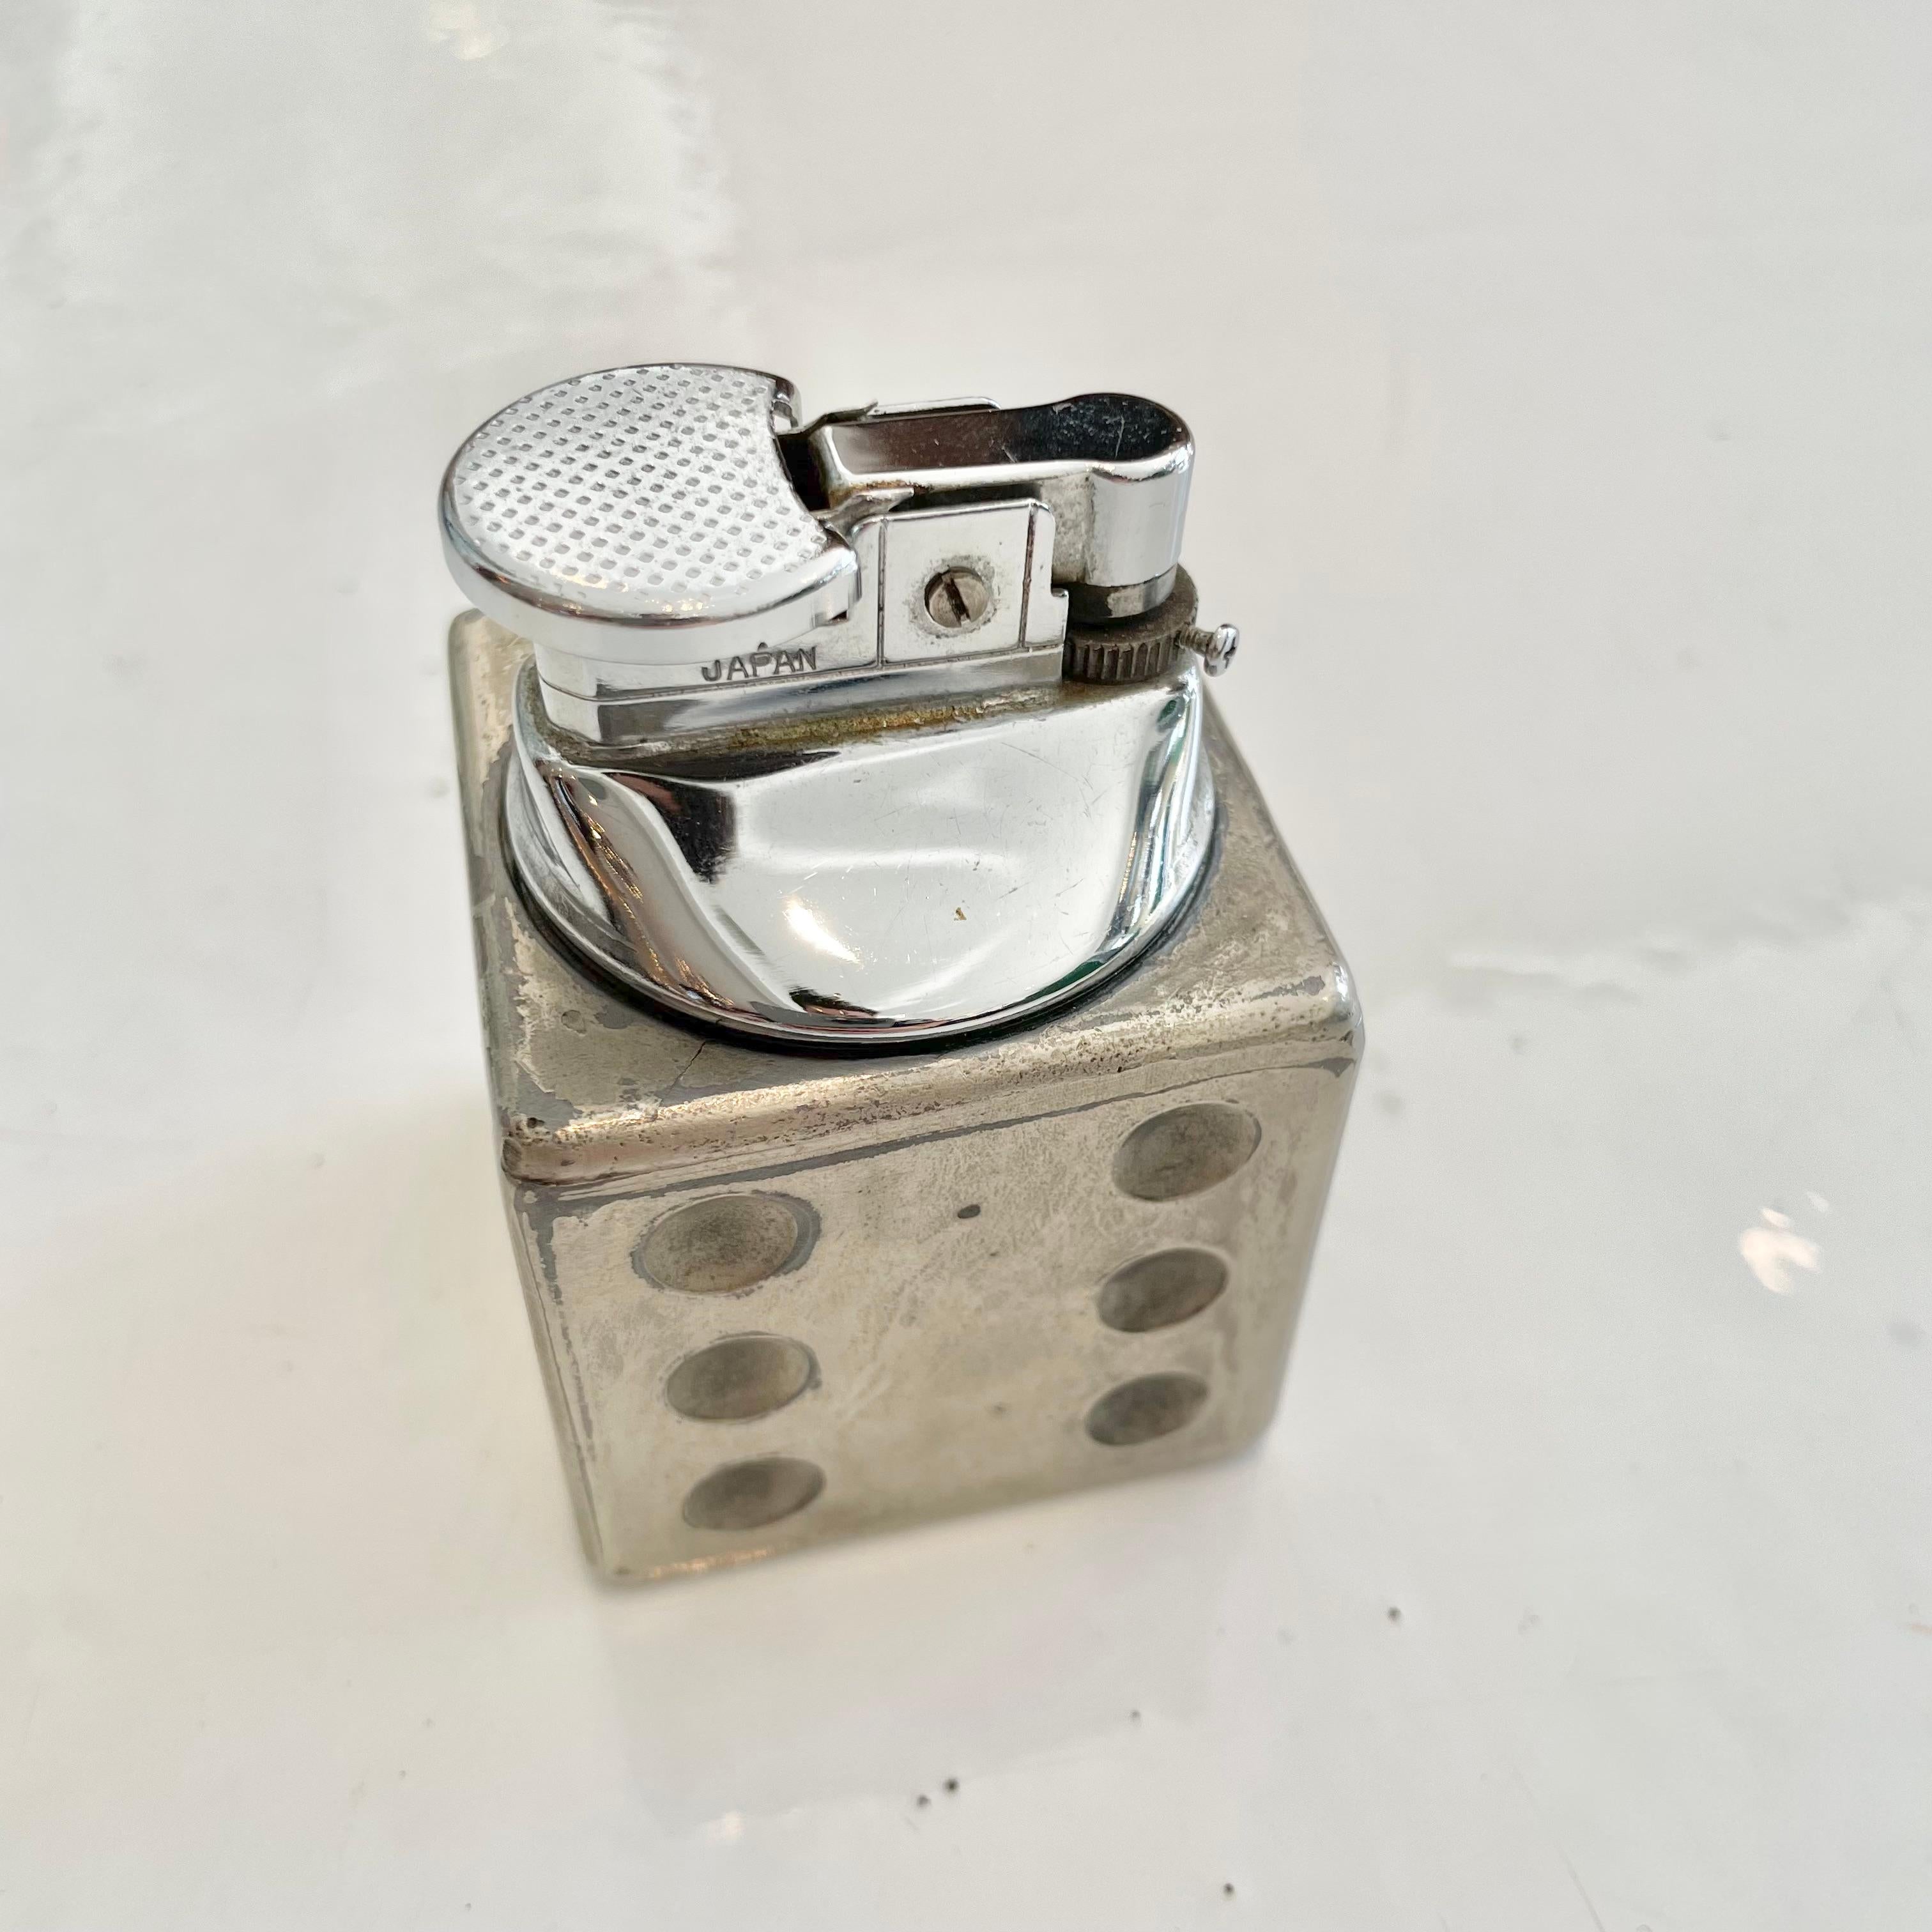 Fun vintage table lighter in the shape of a dice. Made in Japan. Great patina and personality. Cool tobacco accessory and conversation piece. Working lighter. Great vintage condition.